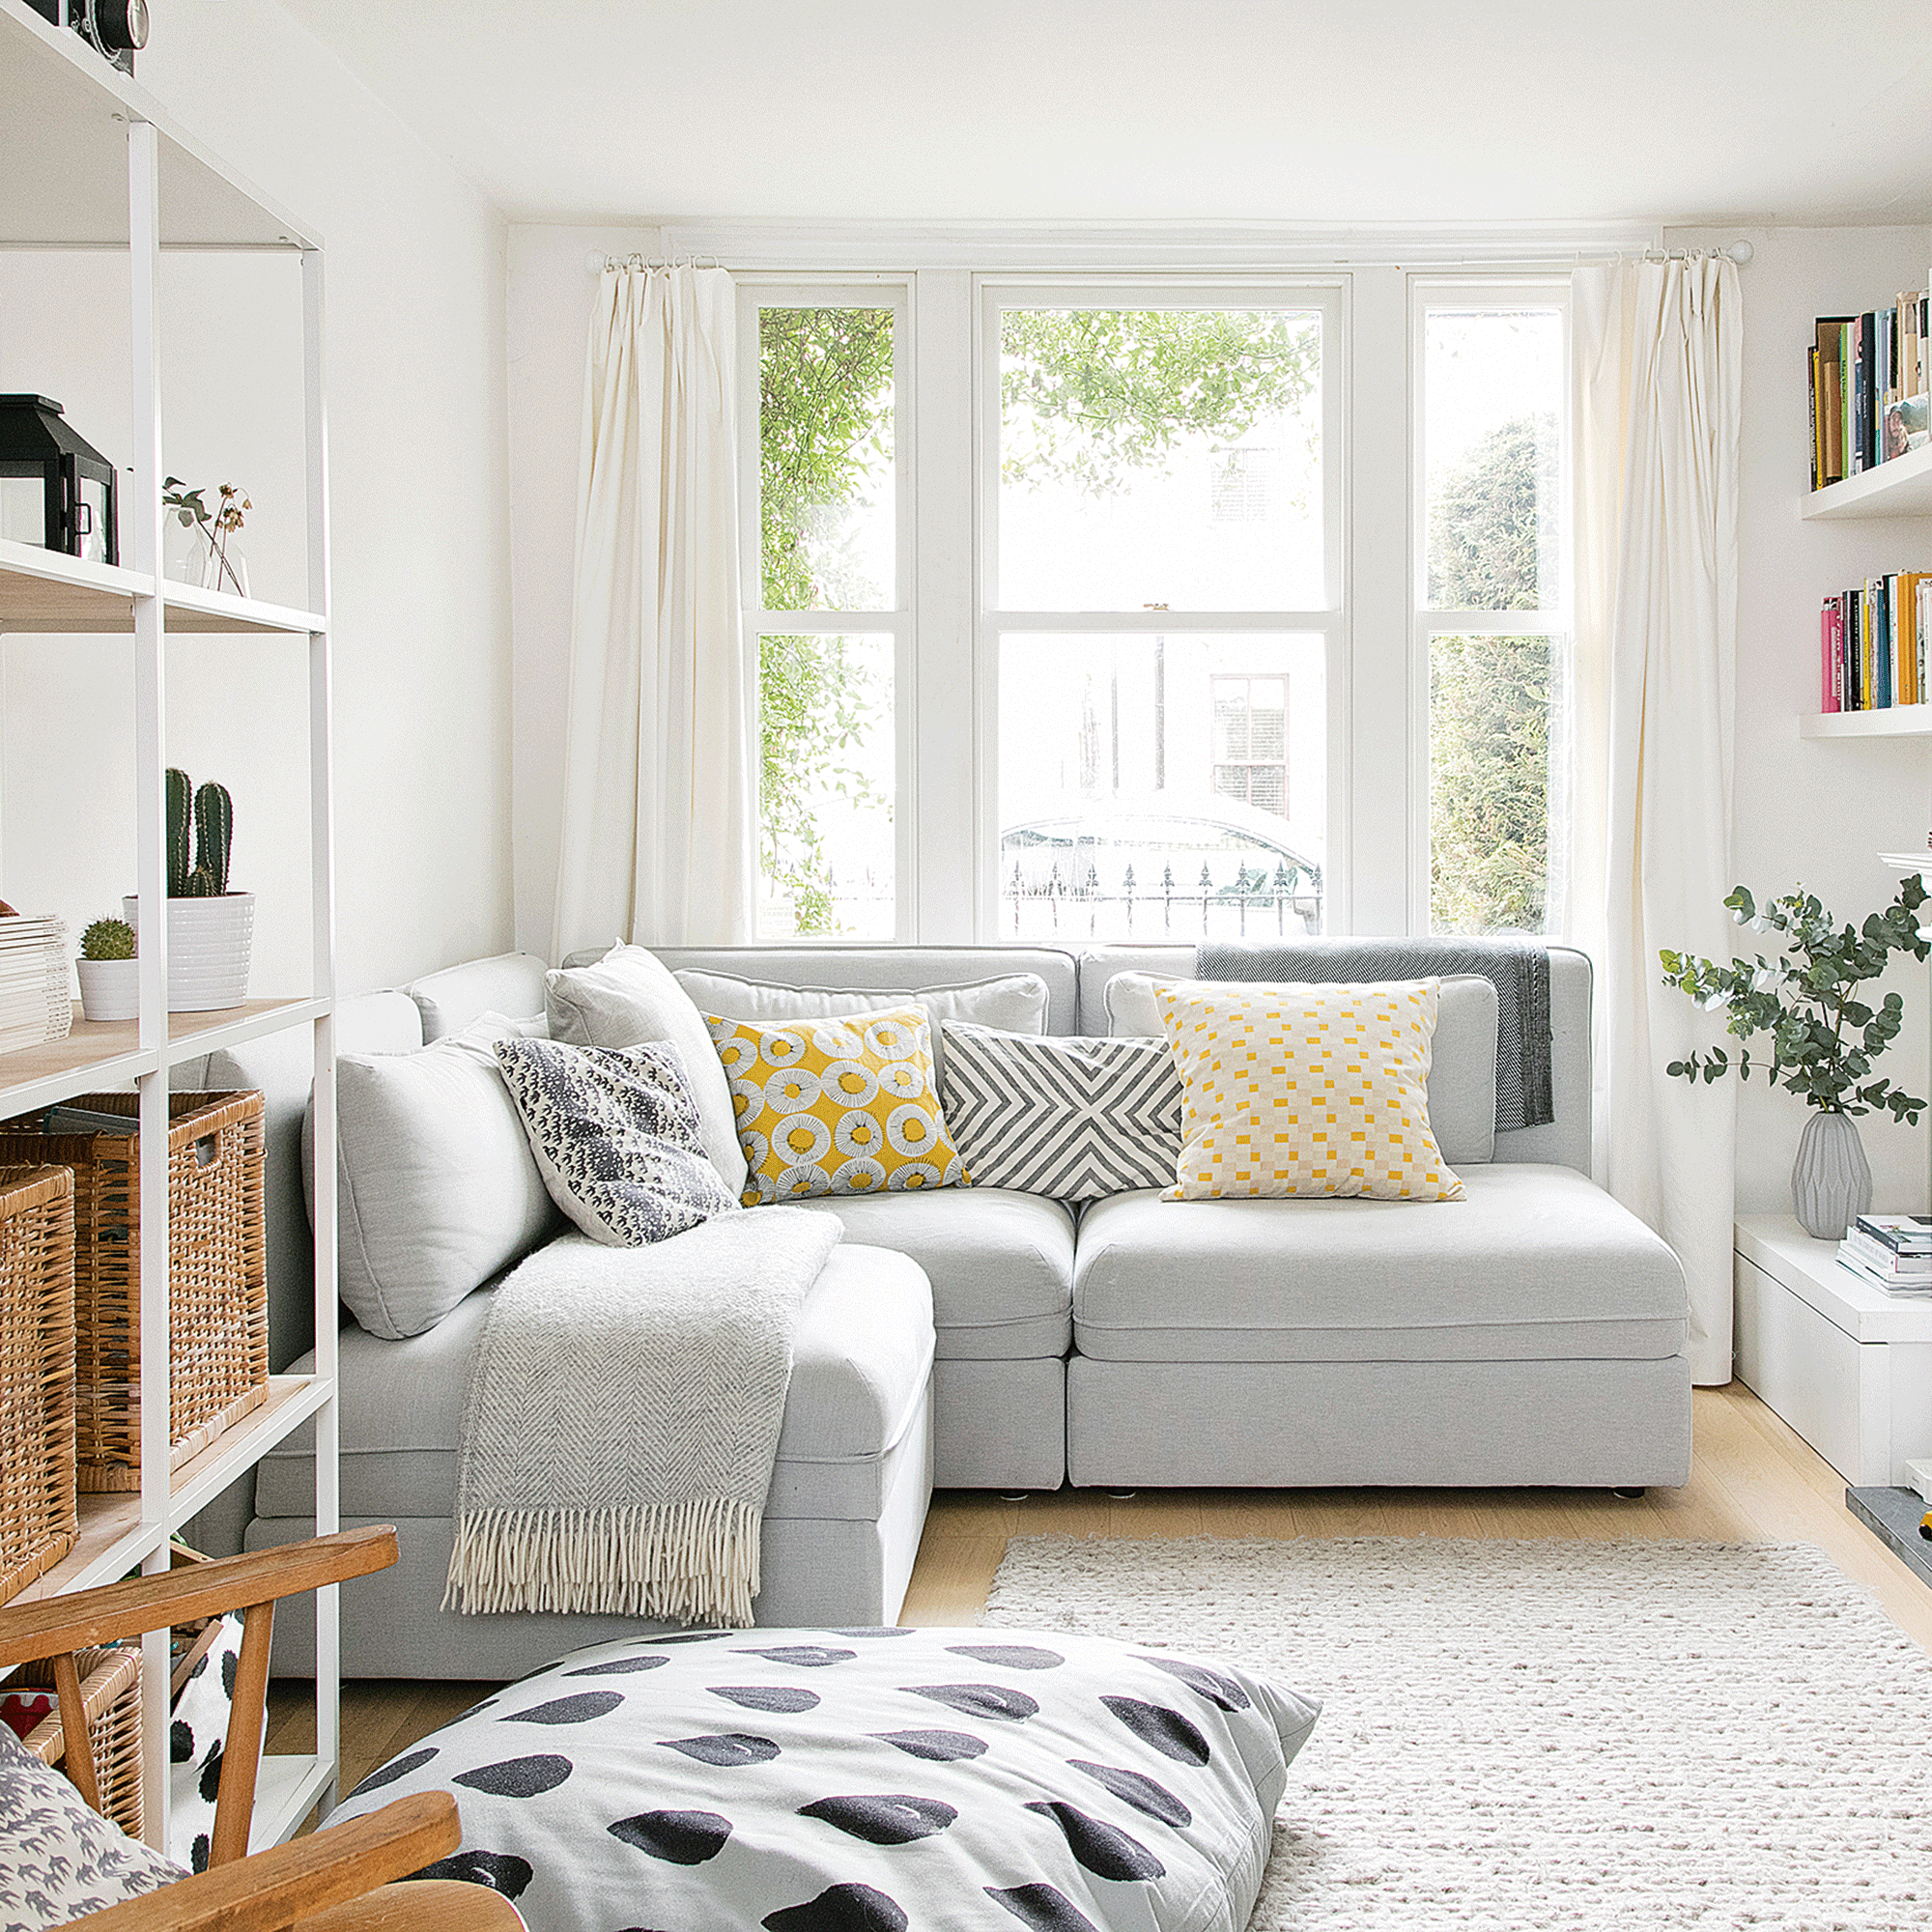 Sofa in small space